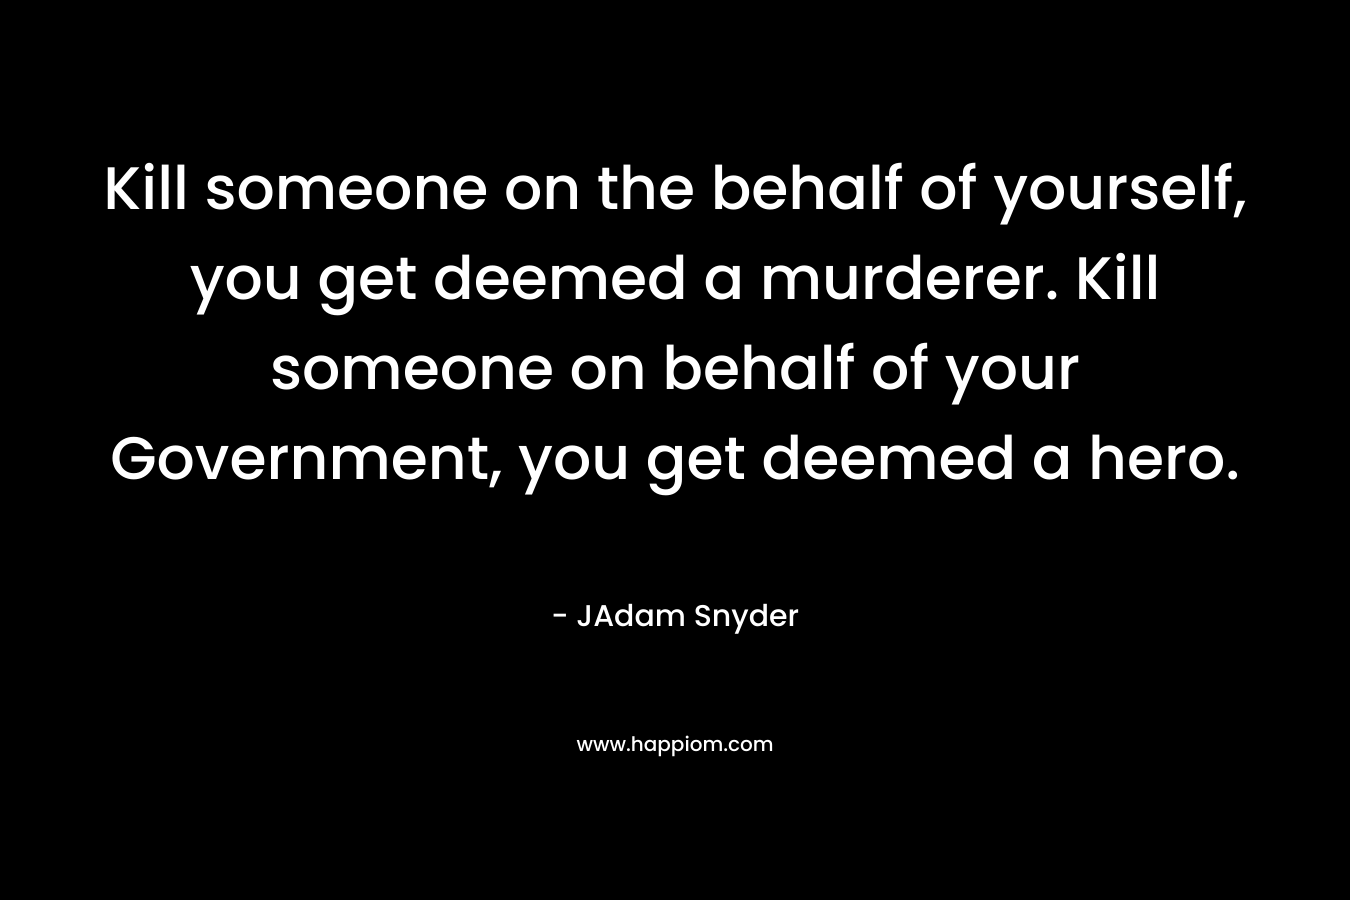 Kill someone on the behalf of yourself, you get deemed a murderer. Kill someone on behalf of your Government, you get deemed a hero.